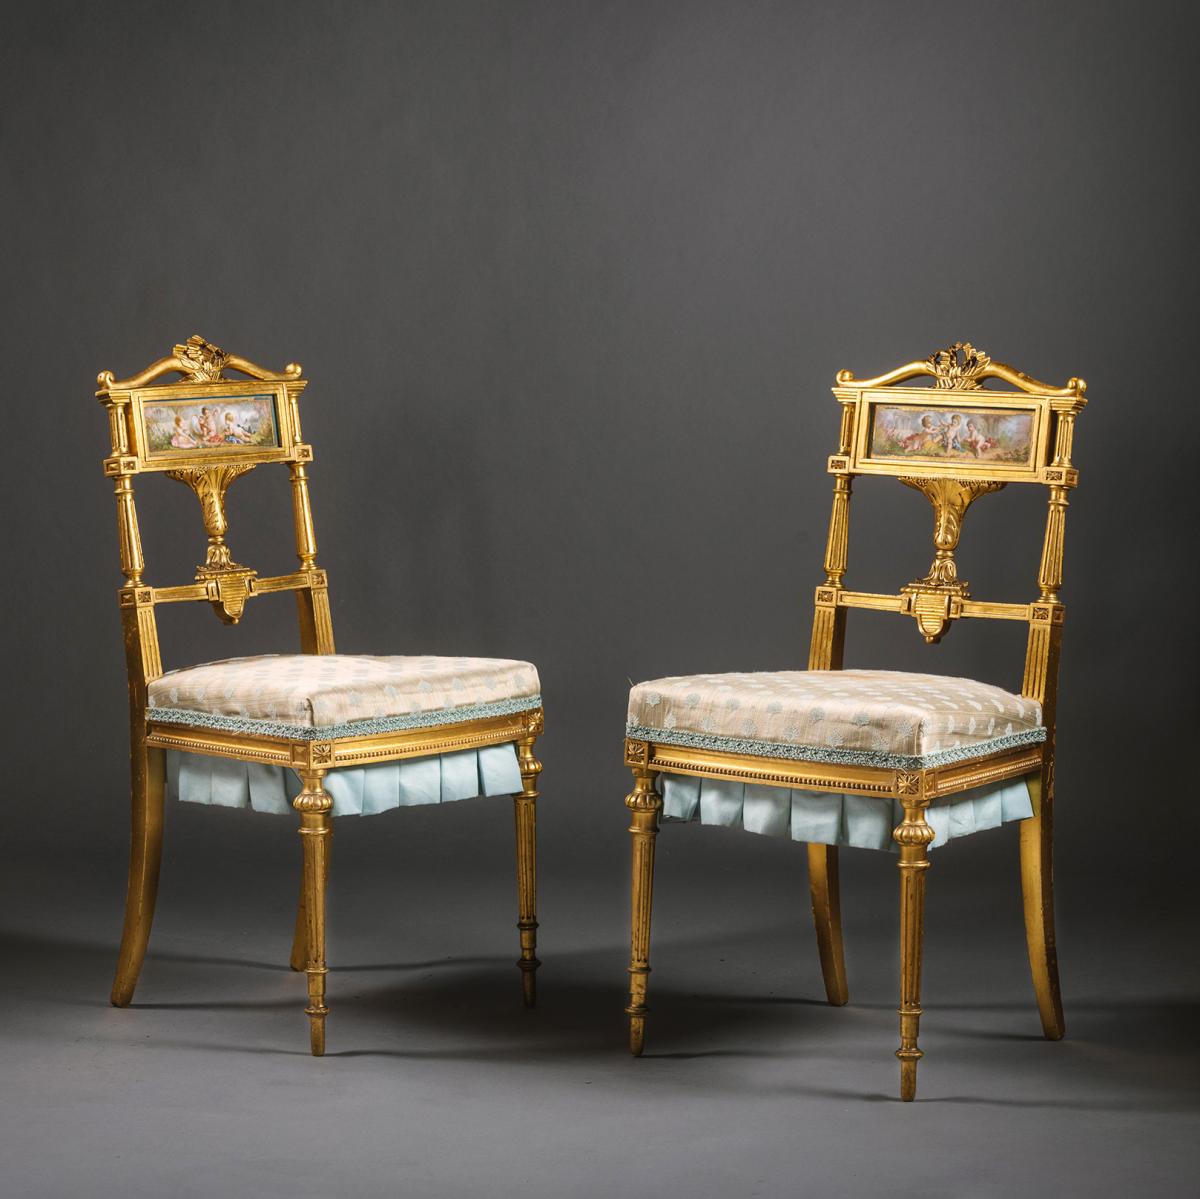 Sèvres-Style Porcelain Mounted Salon or Bedroom Chairs